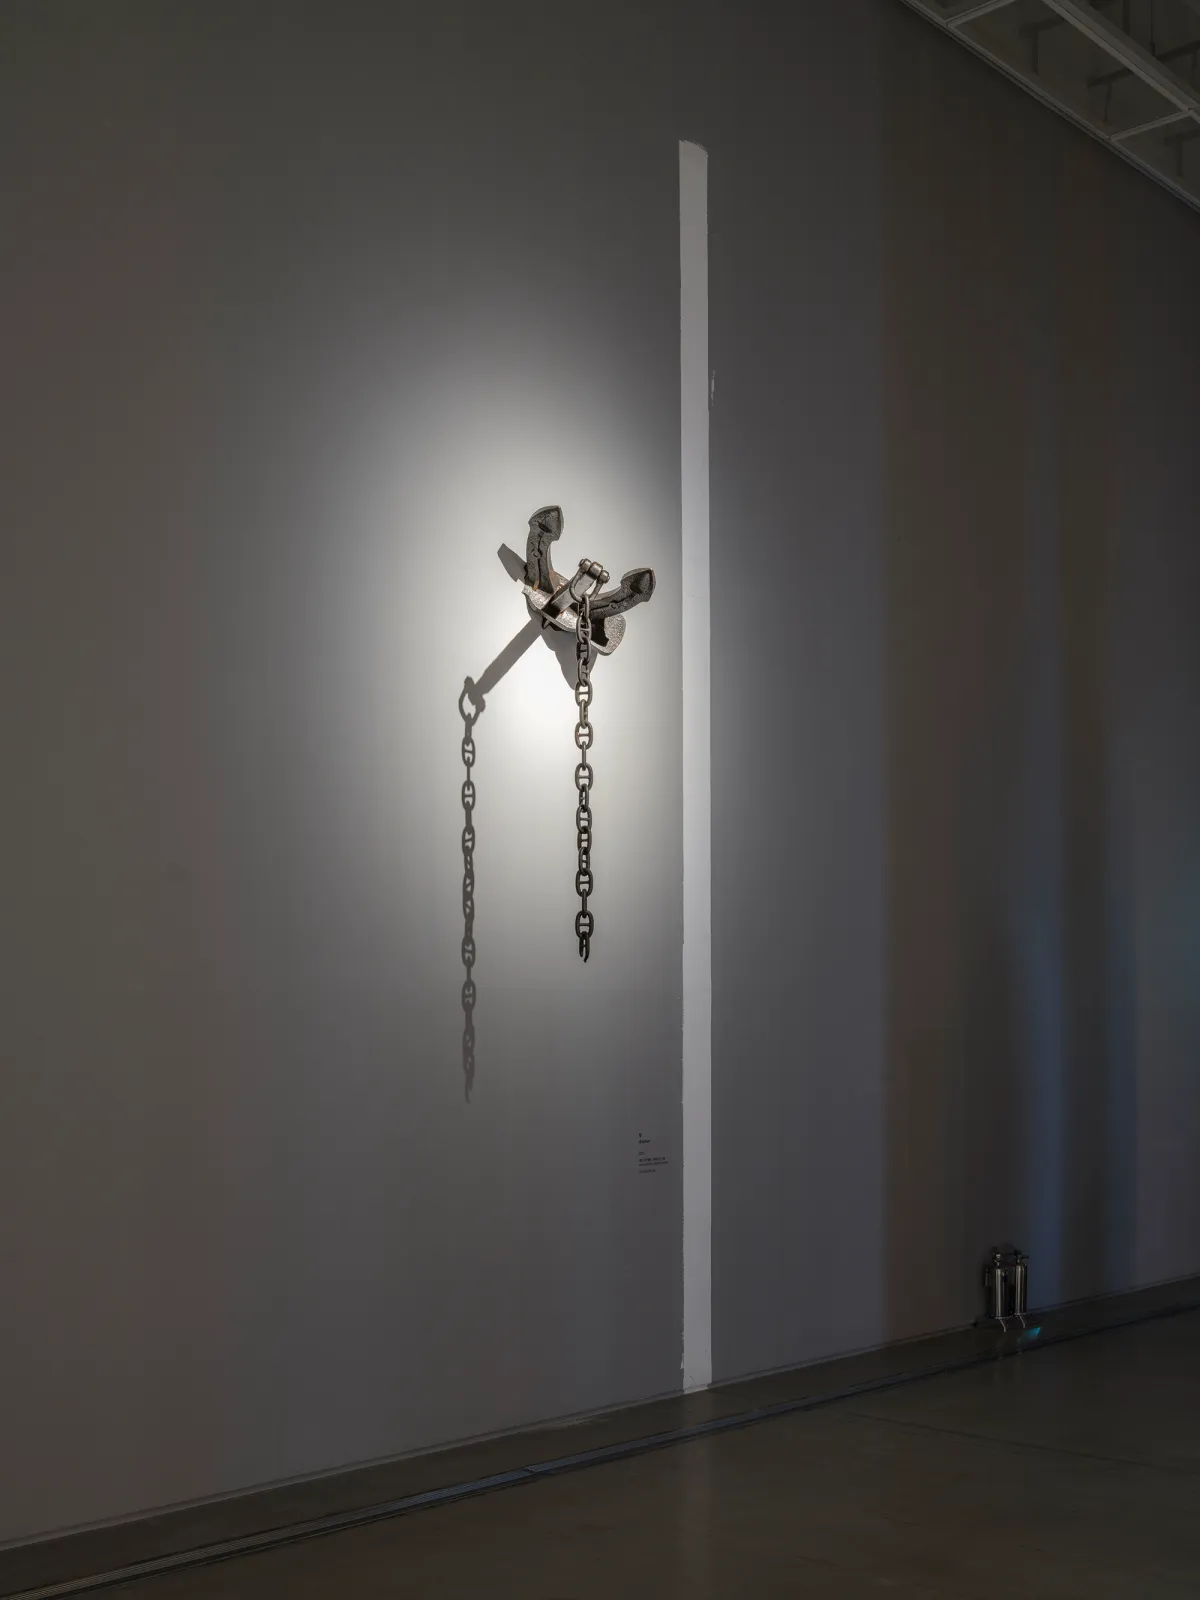 Choe U-Ram, Anchor, 2022, resin, acrylic, stainless steel, 73 x 60 x 54 cm. Image provided by MMCA.